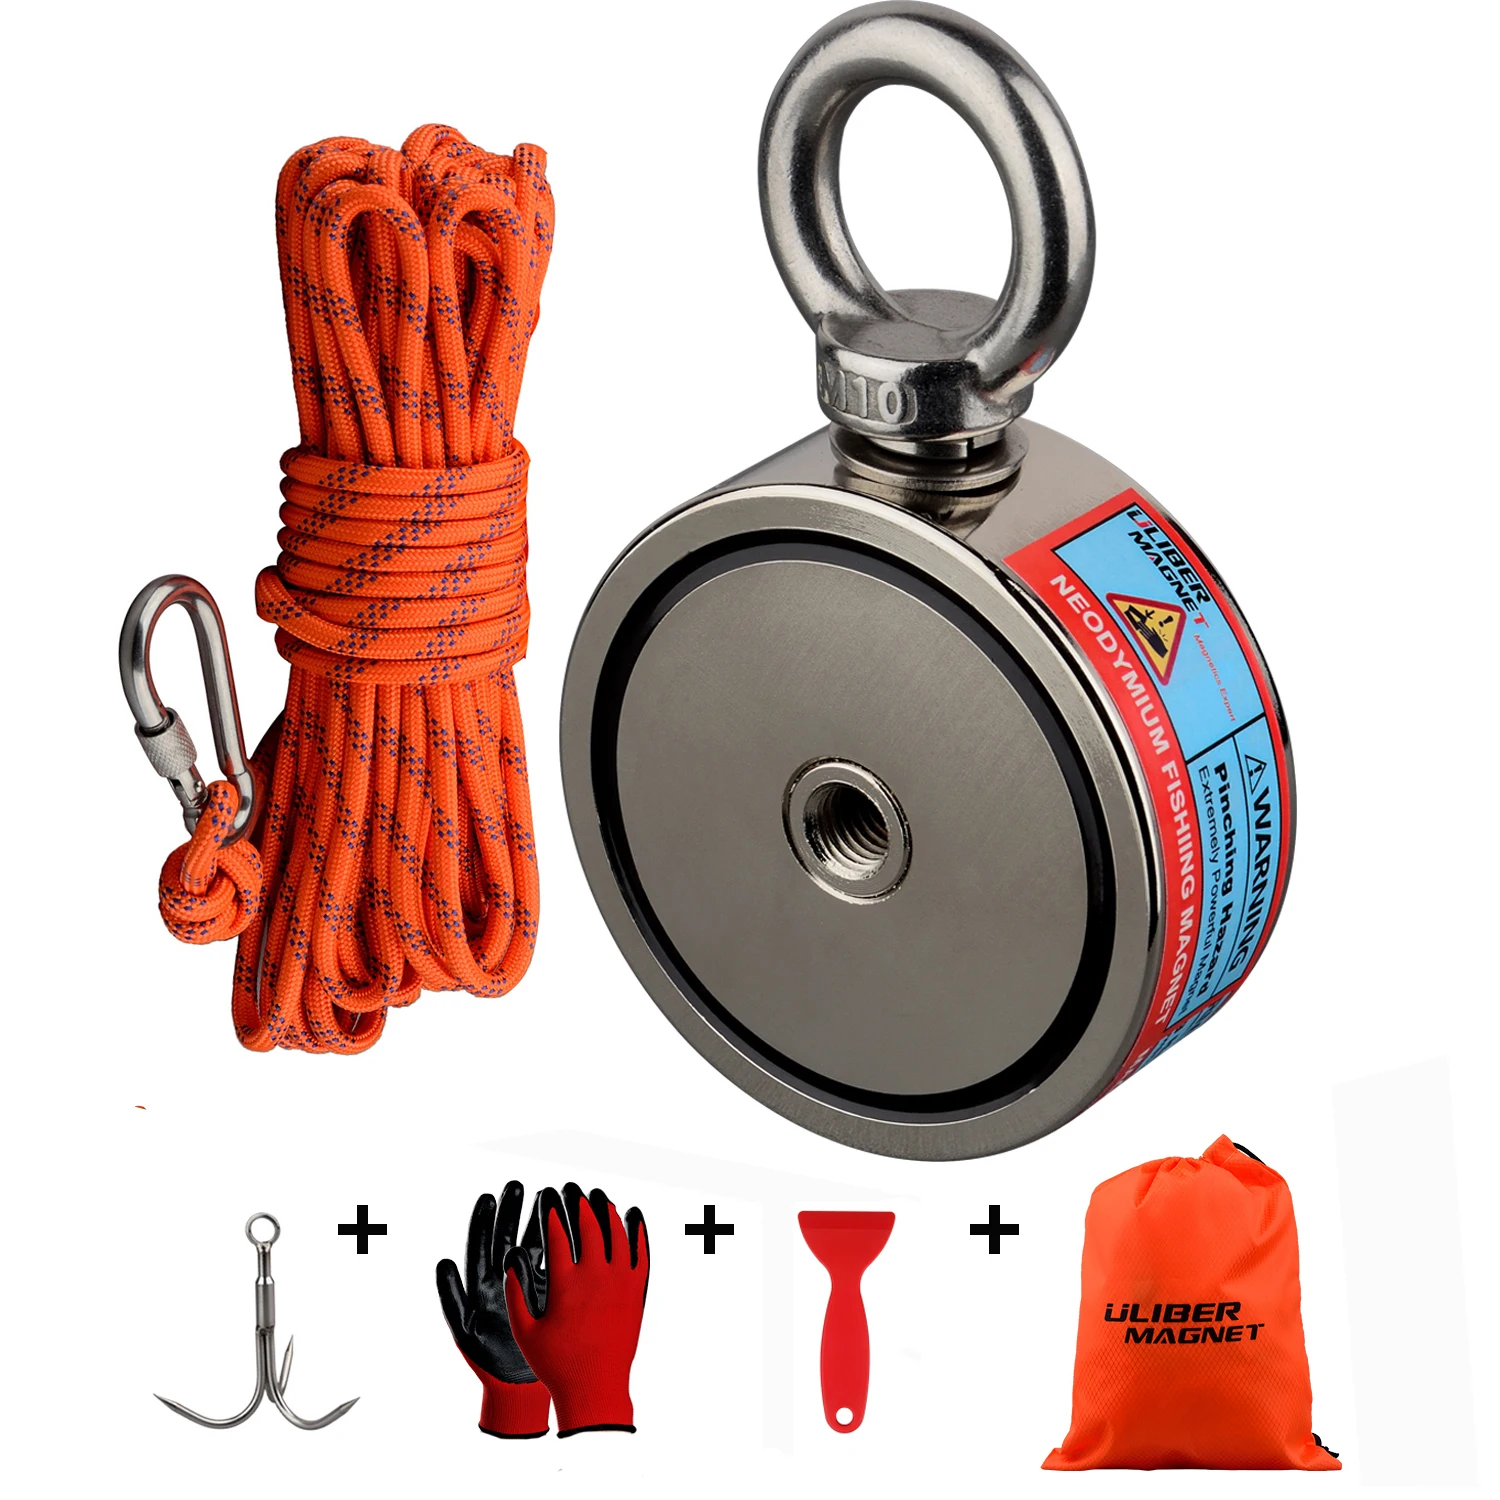 Double Sided 300-500KG Magnet Fishing Kit Neodymium Magnets Rope Claw Gloves Glue Plastic Shovel Bag Magnetic Recovery Salvage